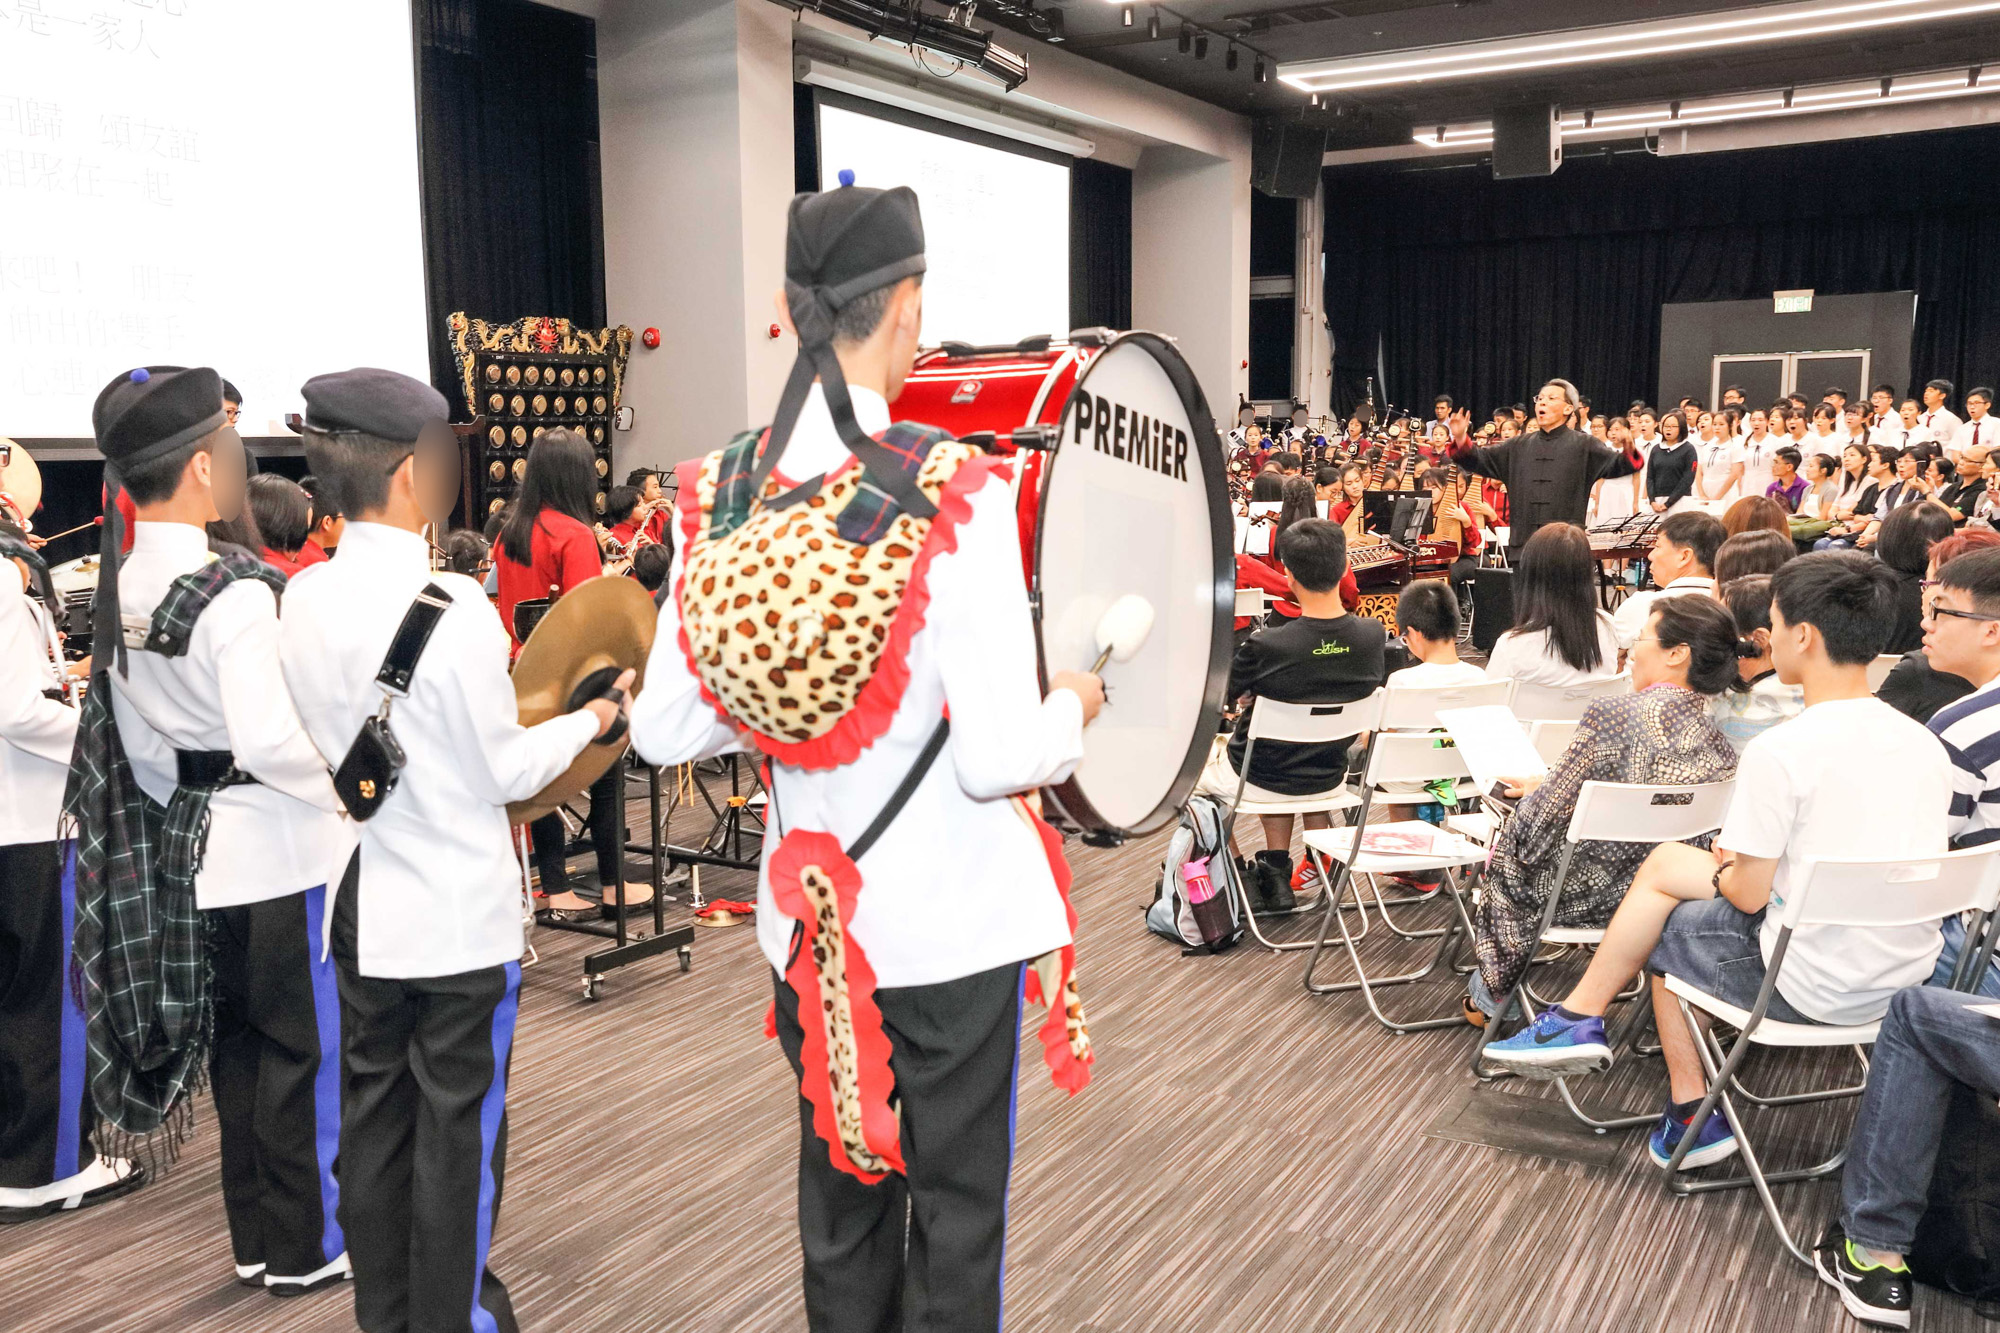 The Marching Band of Cape Collinson Correctional Institution and the Music for Our Young Foundation
held two concerts jointly on July 1 to celebrate the 20th Anniversary of the establishment of the HKSAR.